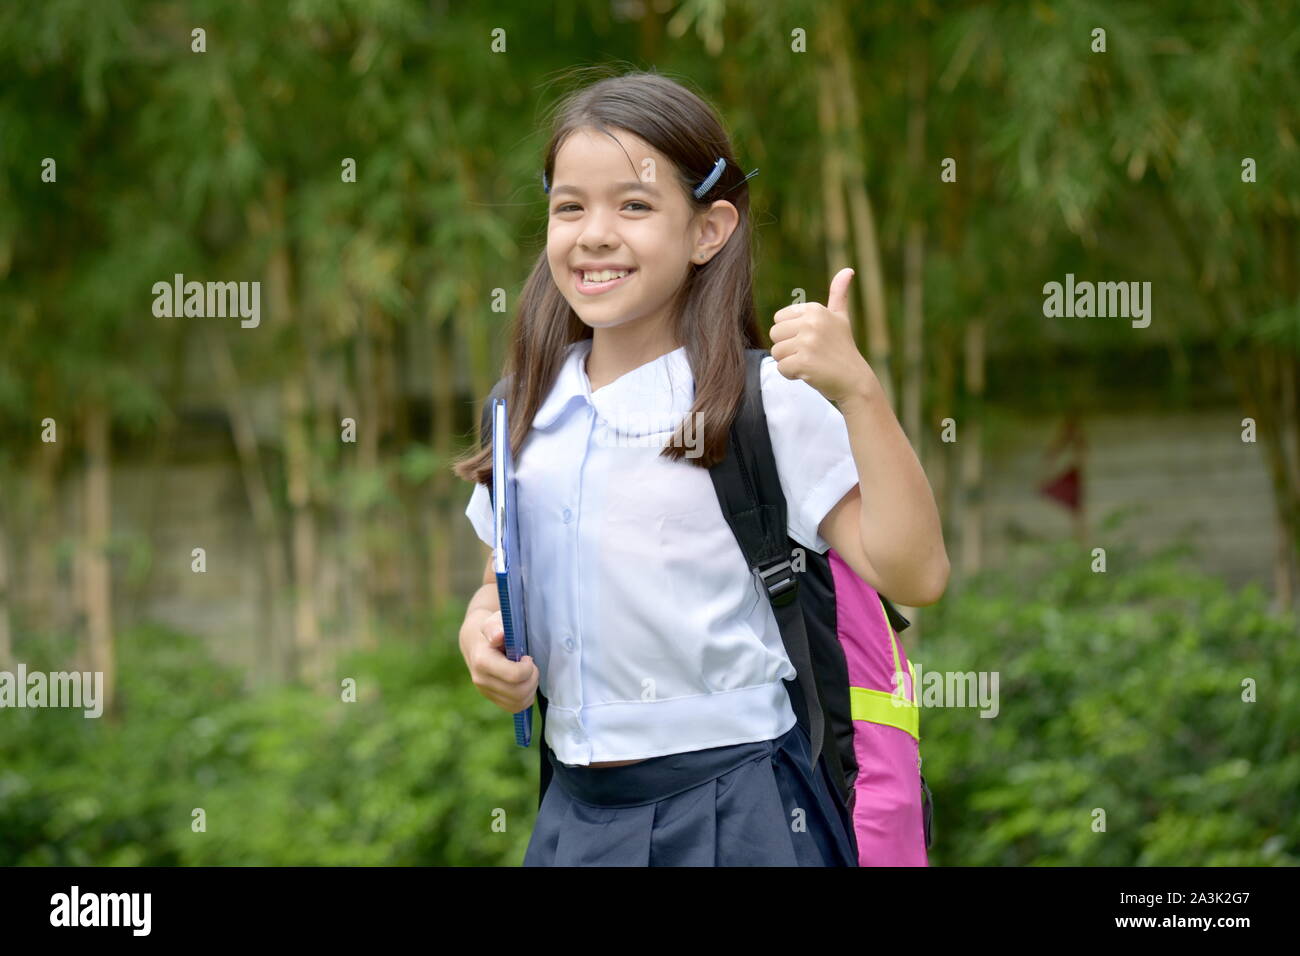 A Filipina School Girl And Happiness Stock Photo